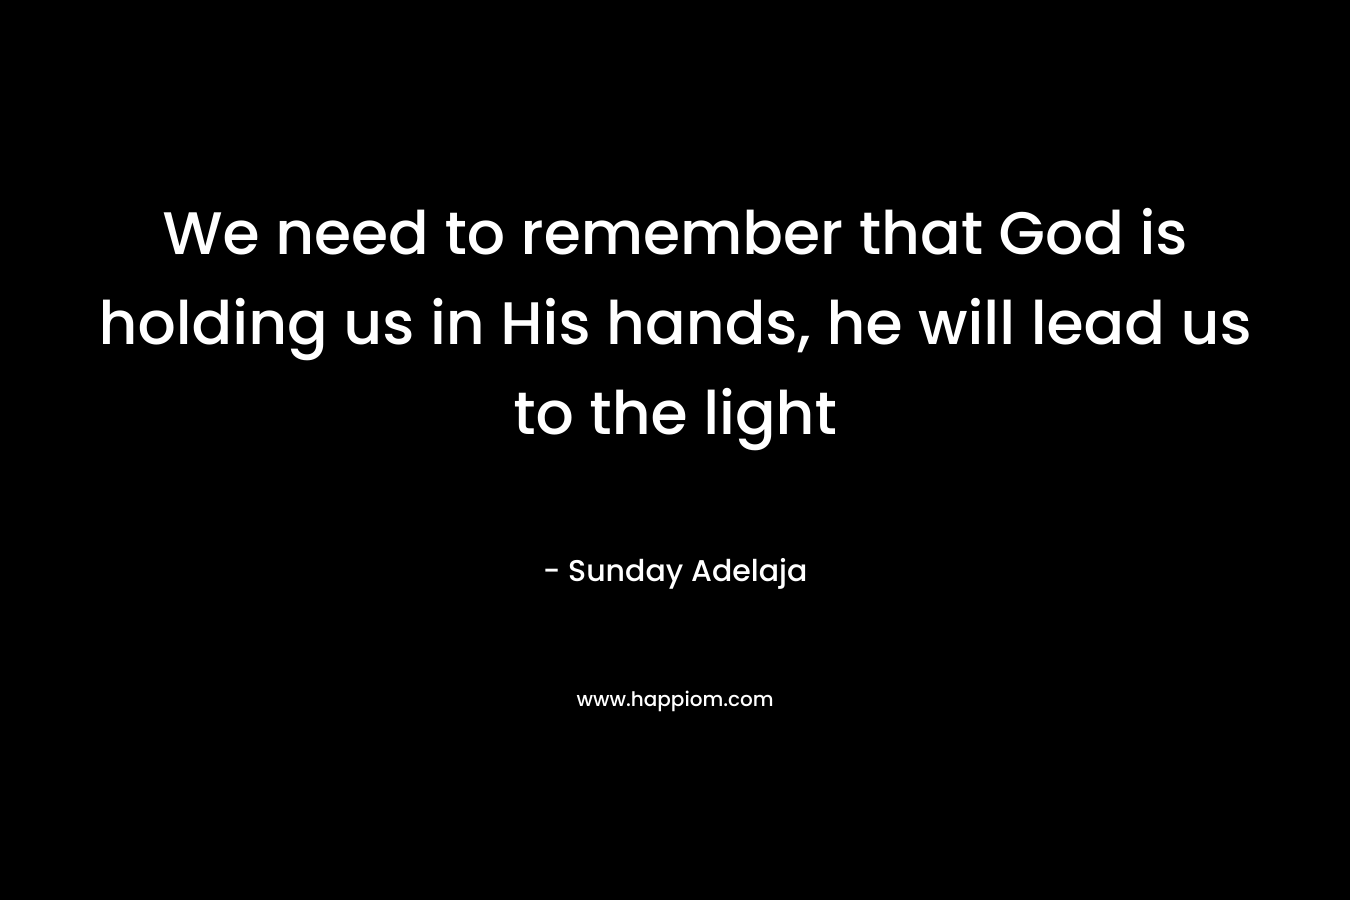 We need to remember that God is holding us in His hands, he will lead us to the light